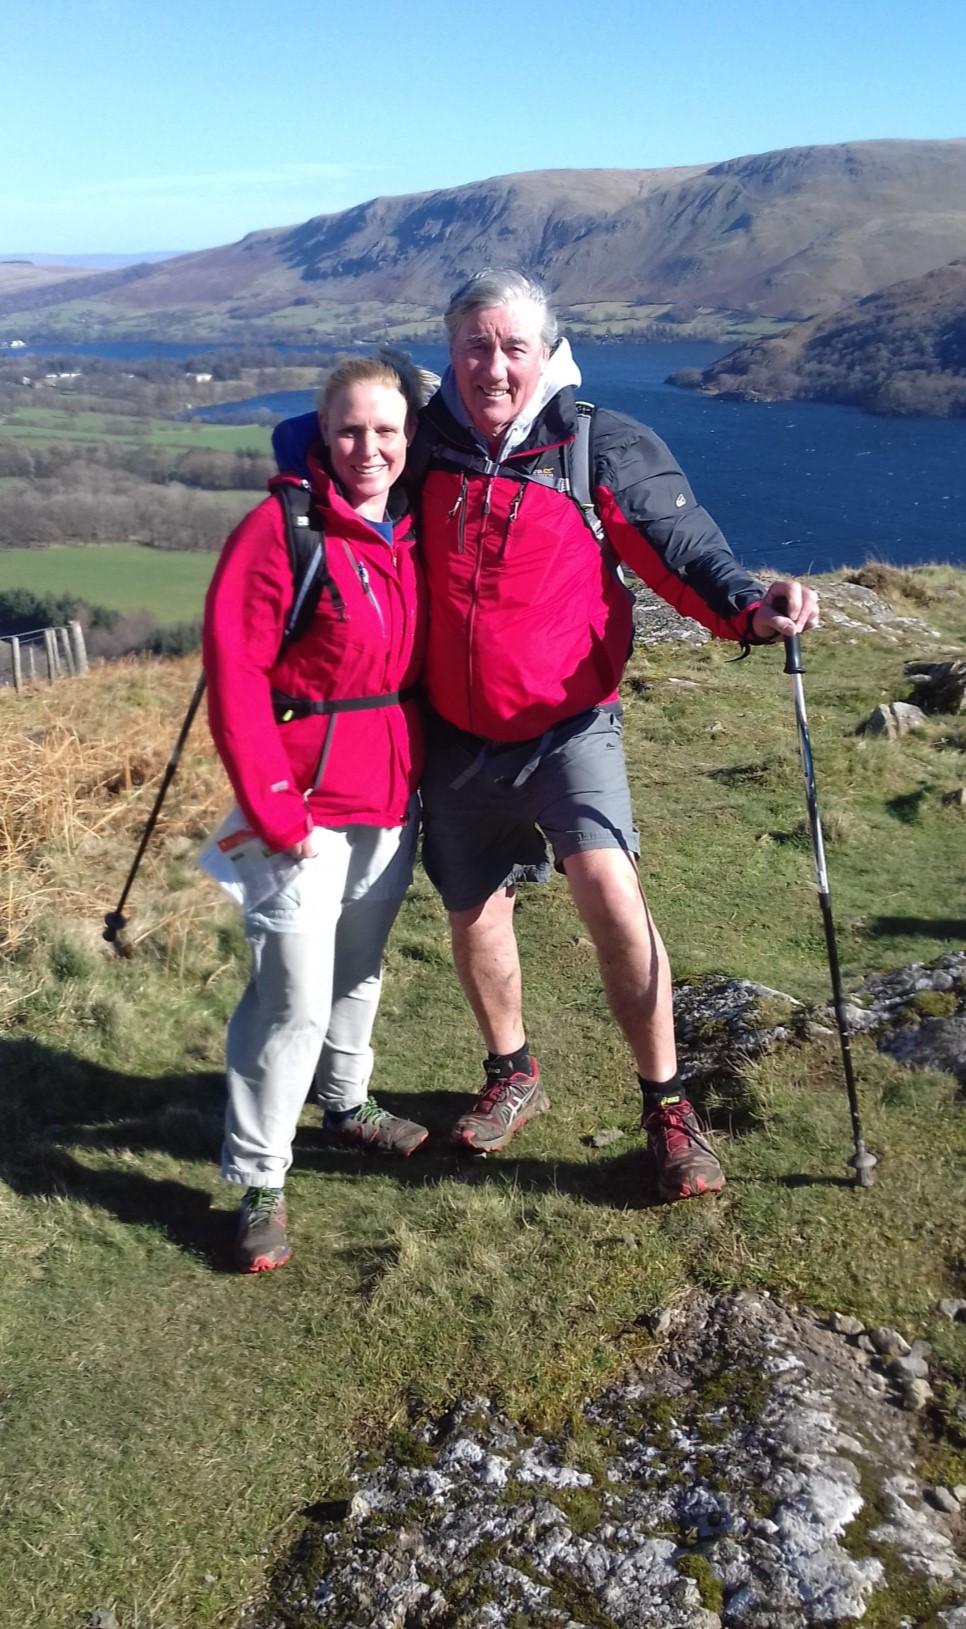 Lake District walk to celebrate the NHS A FYLDE coast nurse will be walking more than 70 miles across the Cumbria Way to raise money for hospital patients.